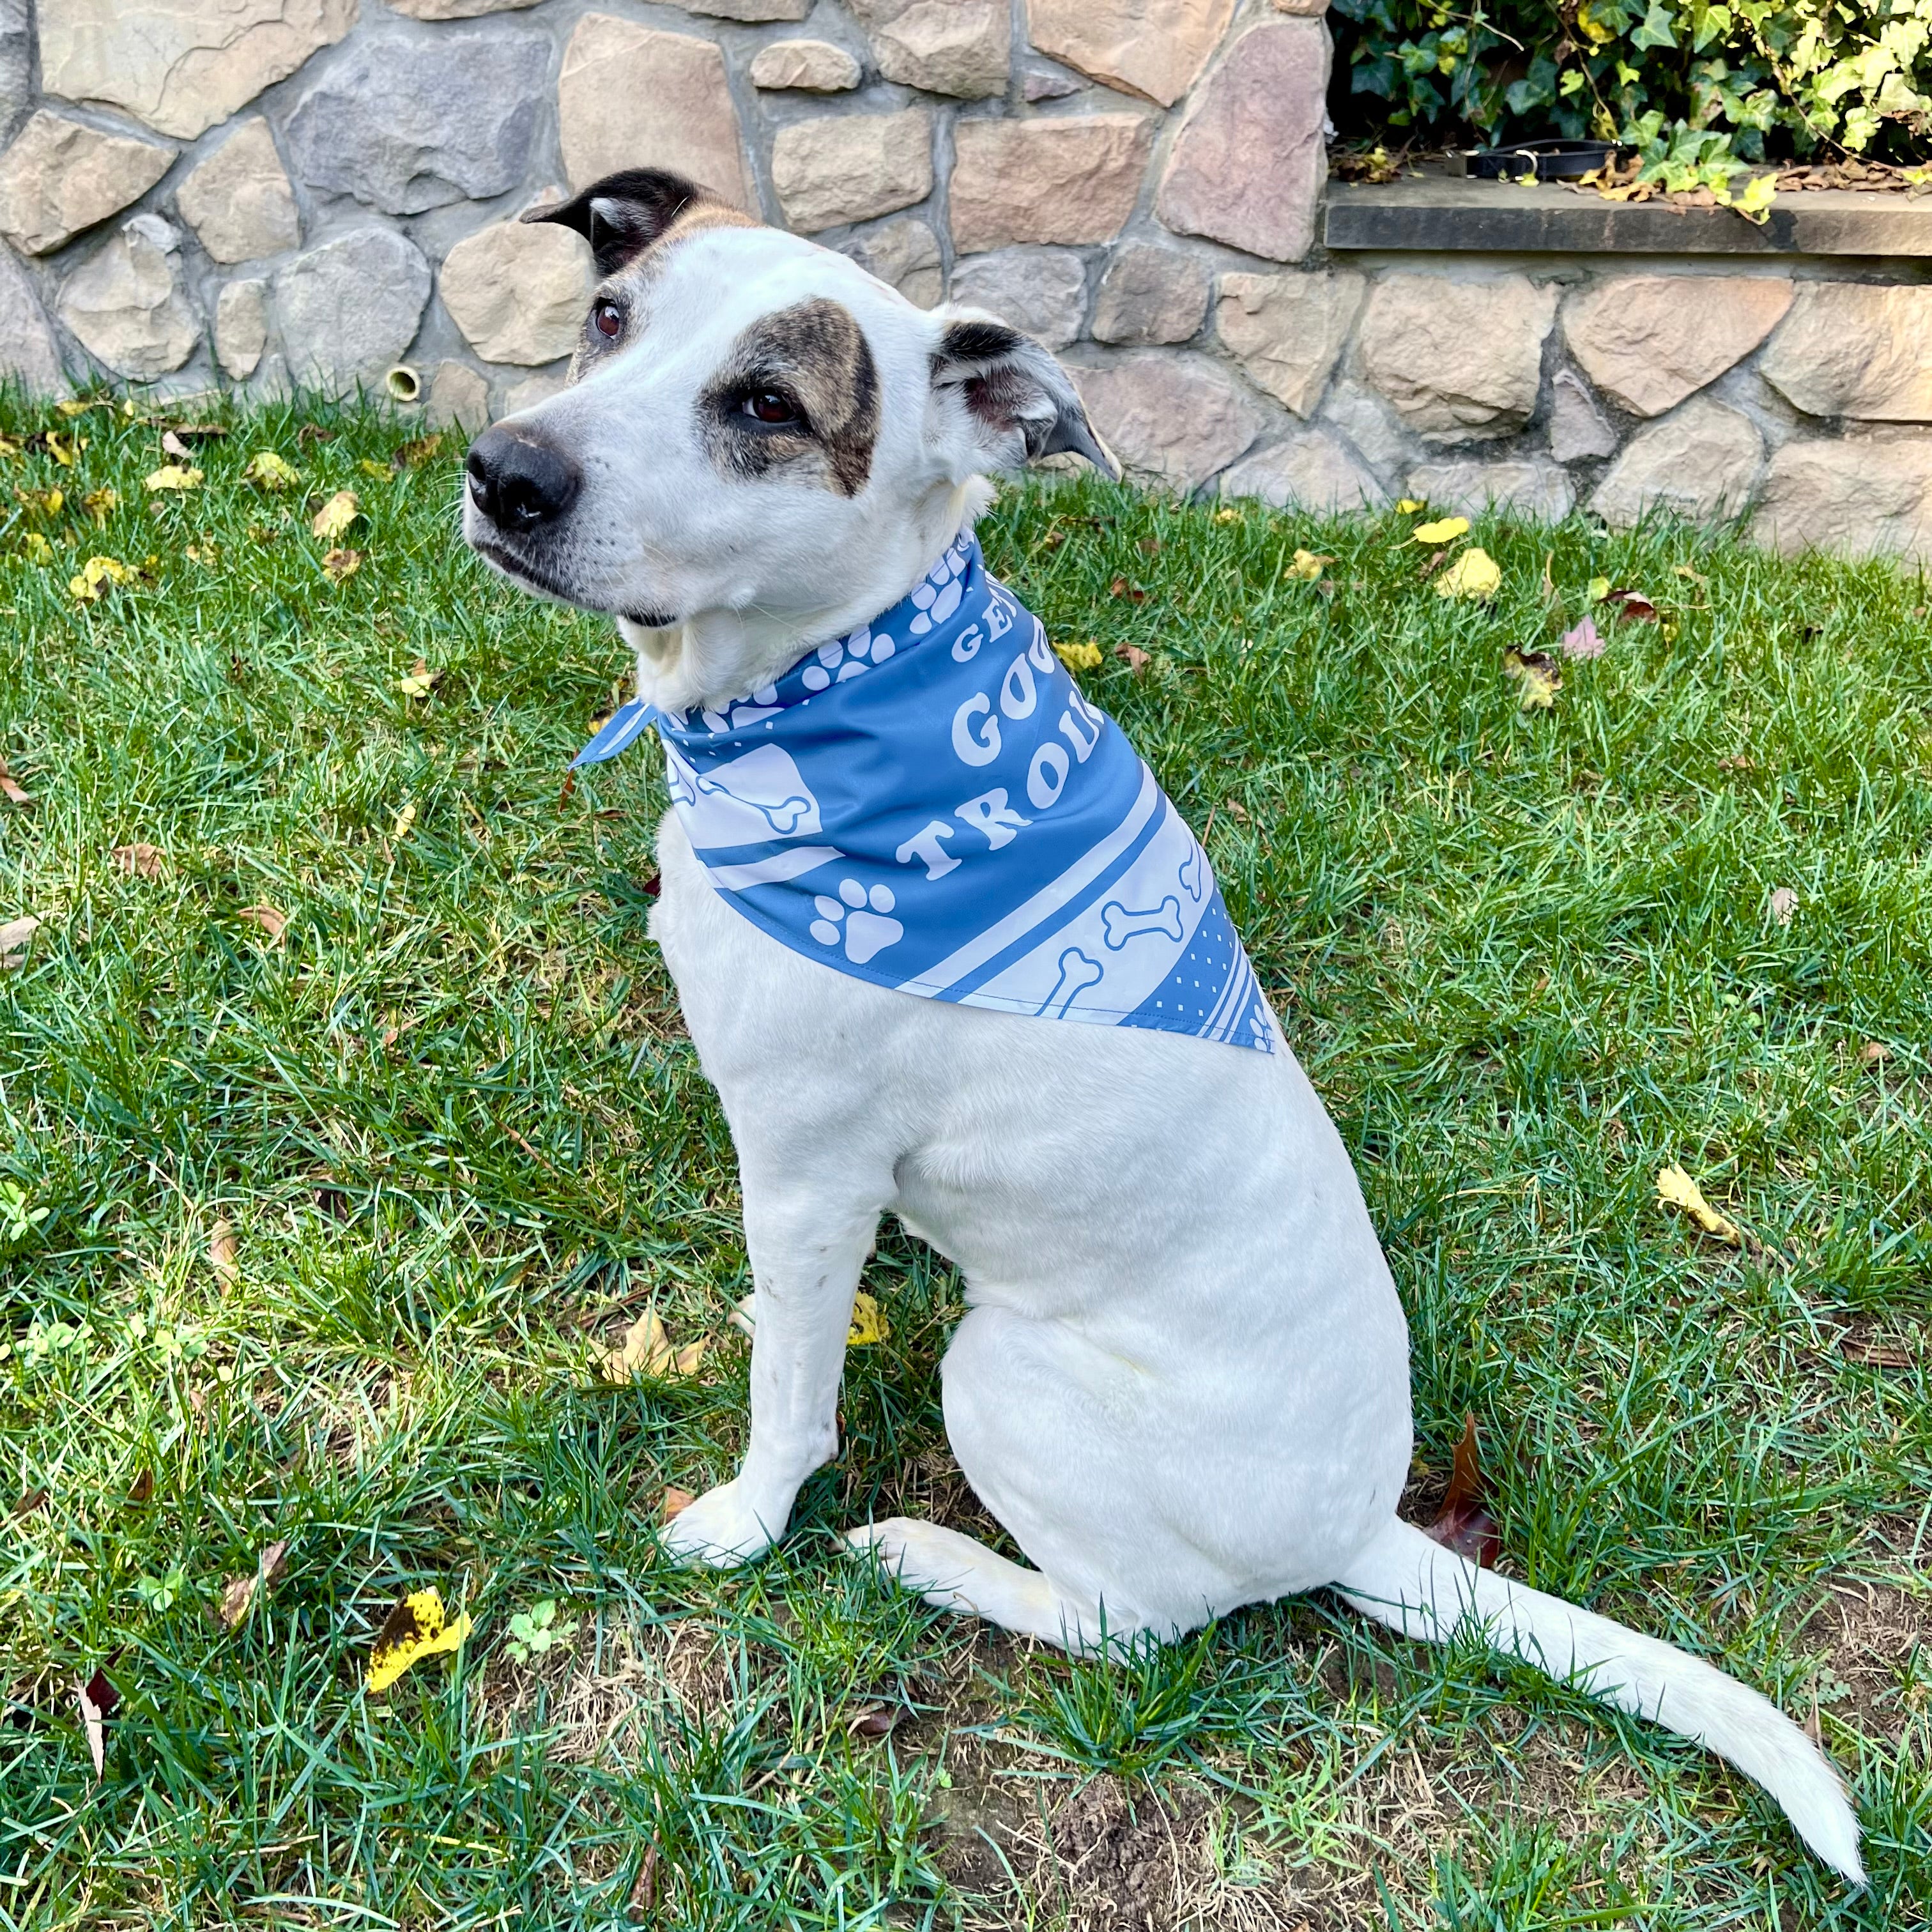 White dog wears a blue bandanna with "Get In Good Trouble" Design with Bones and Pawprints